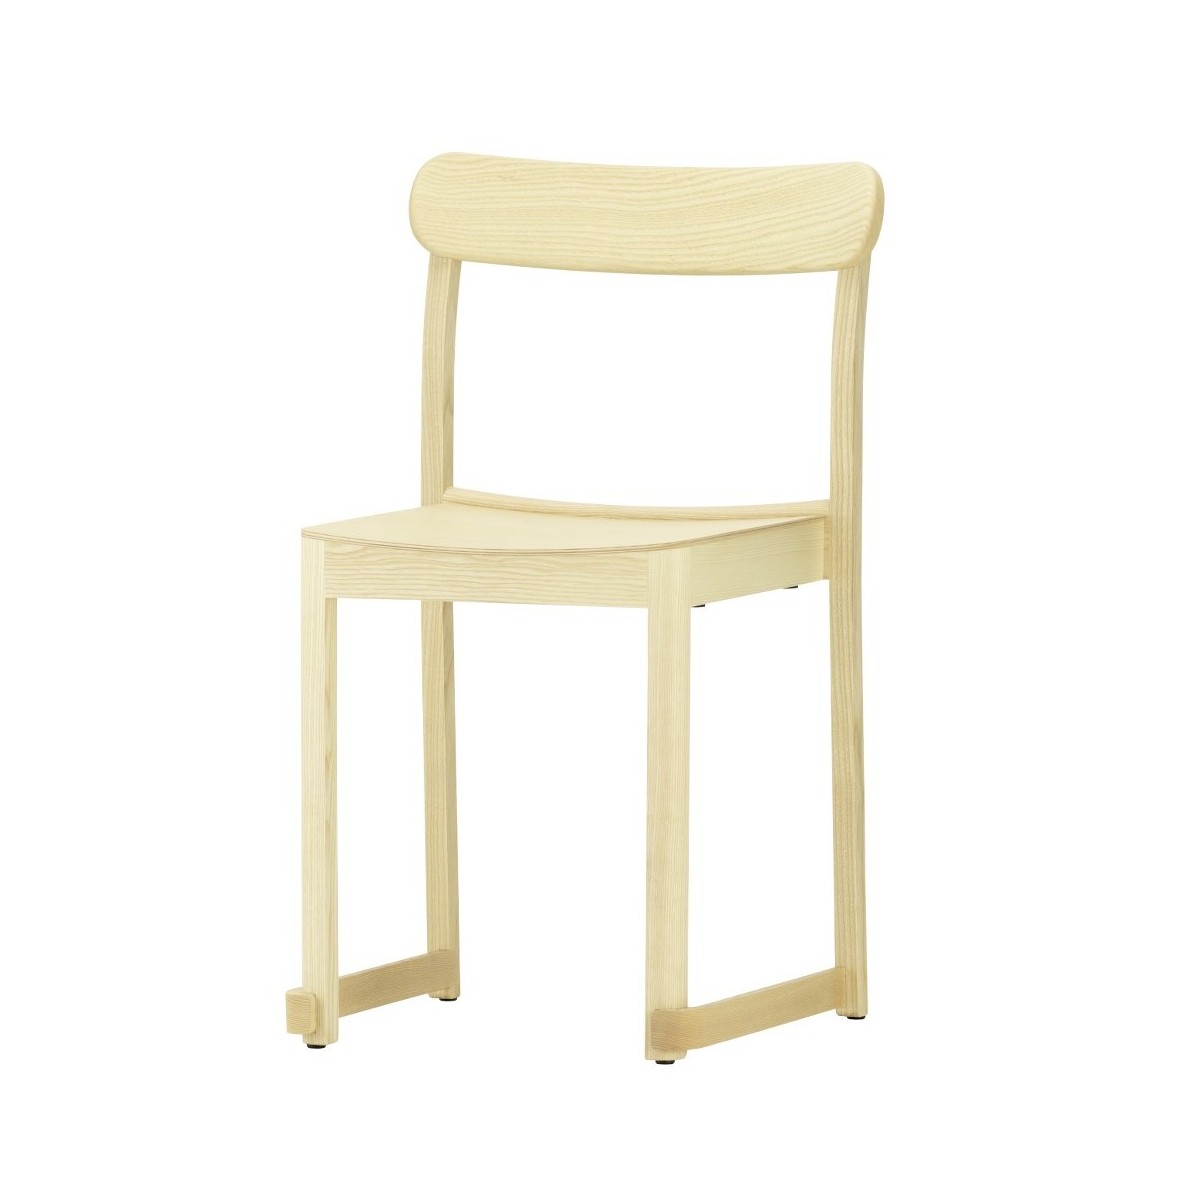 ash, lacquered - Atelier Chair